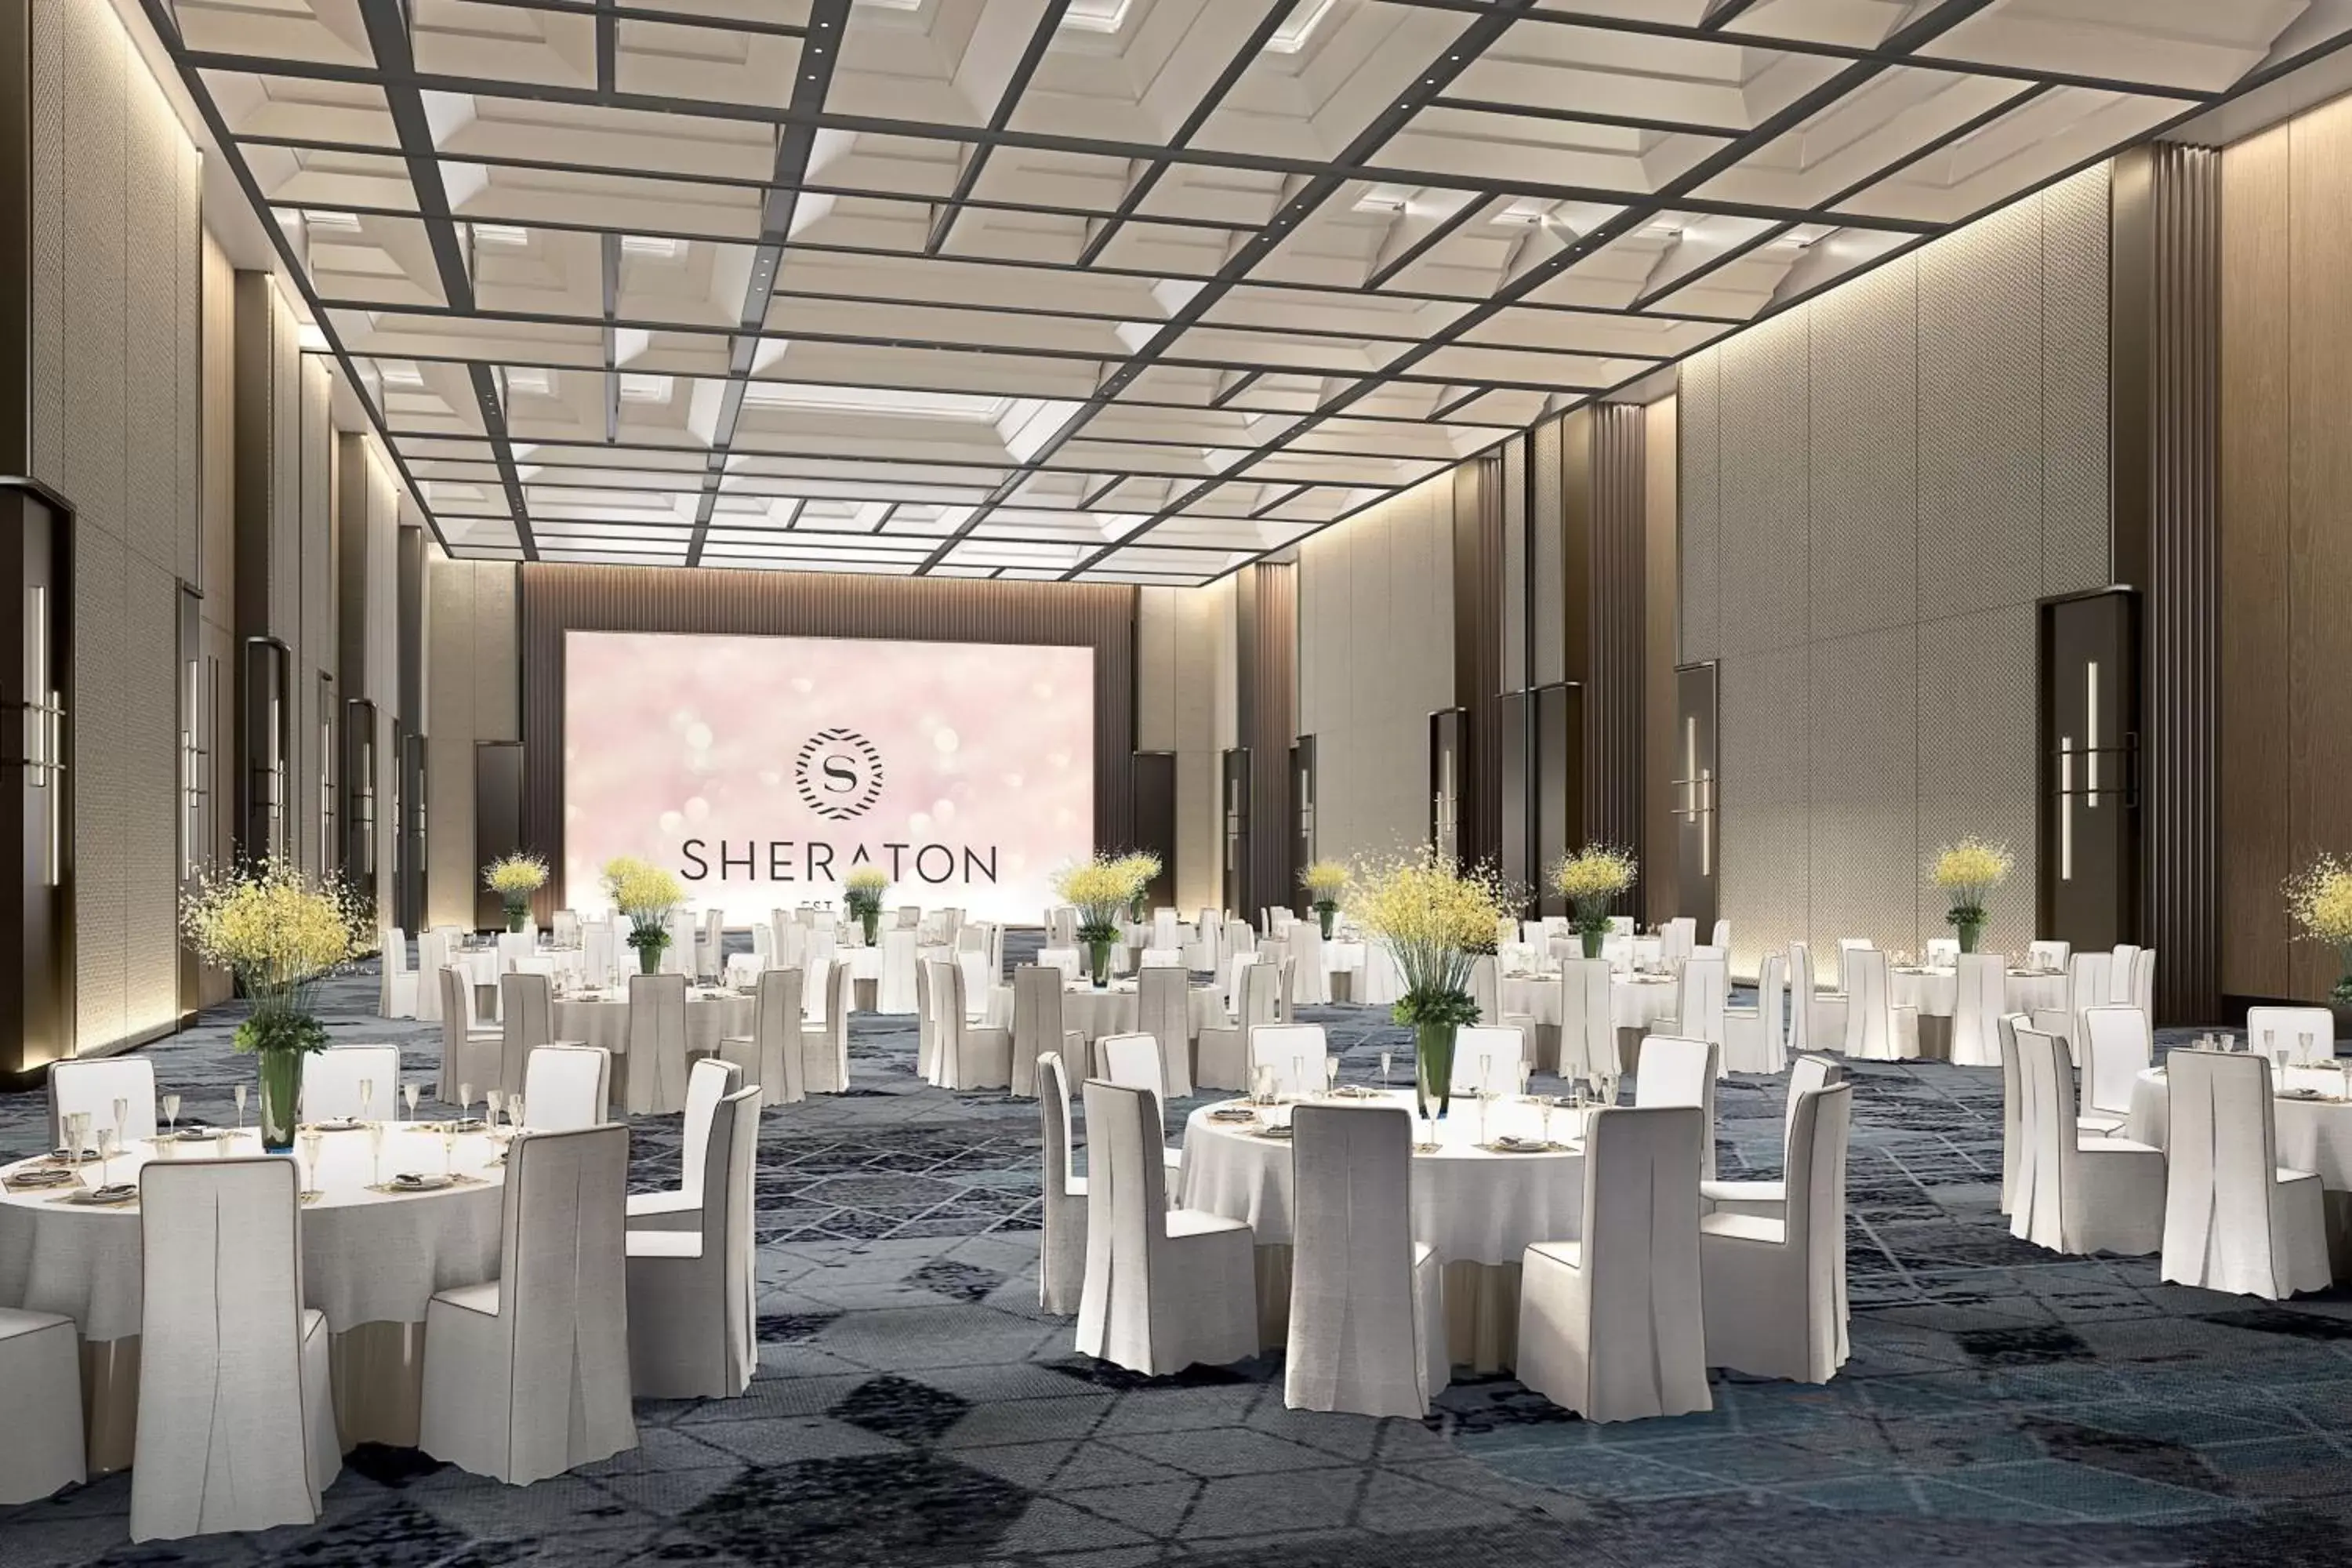 Meeting/conference room, Banquet Facilities in Sheraton Zhaoqing Dinghu